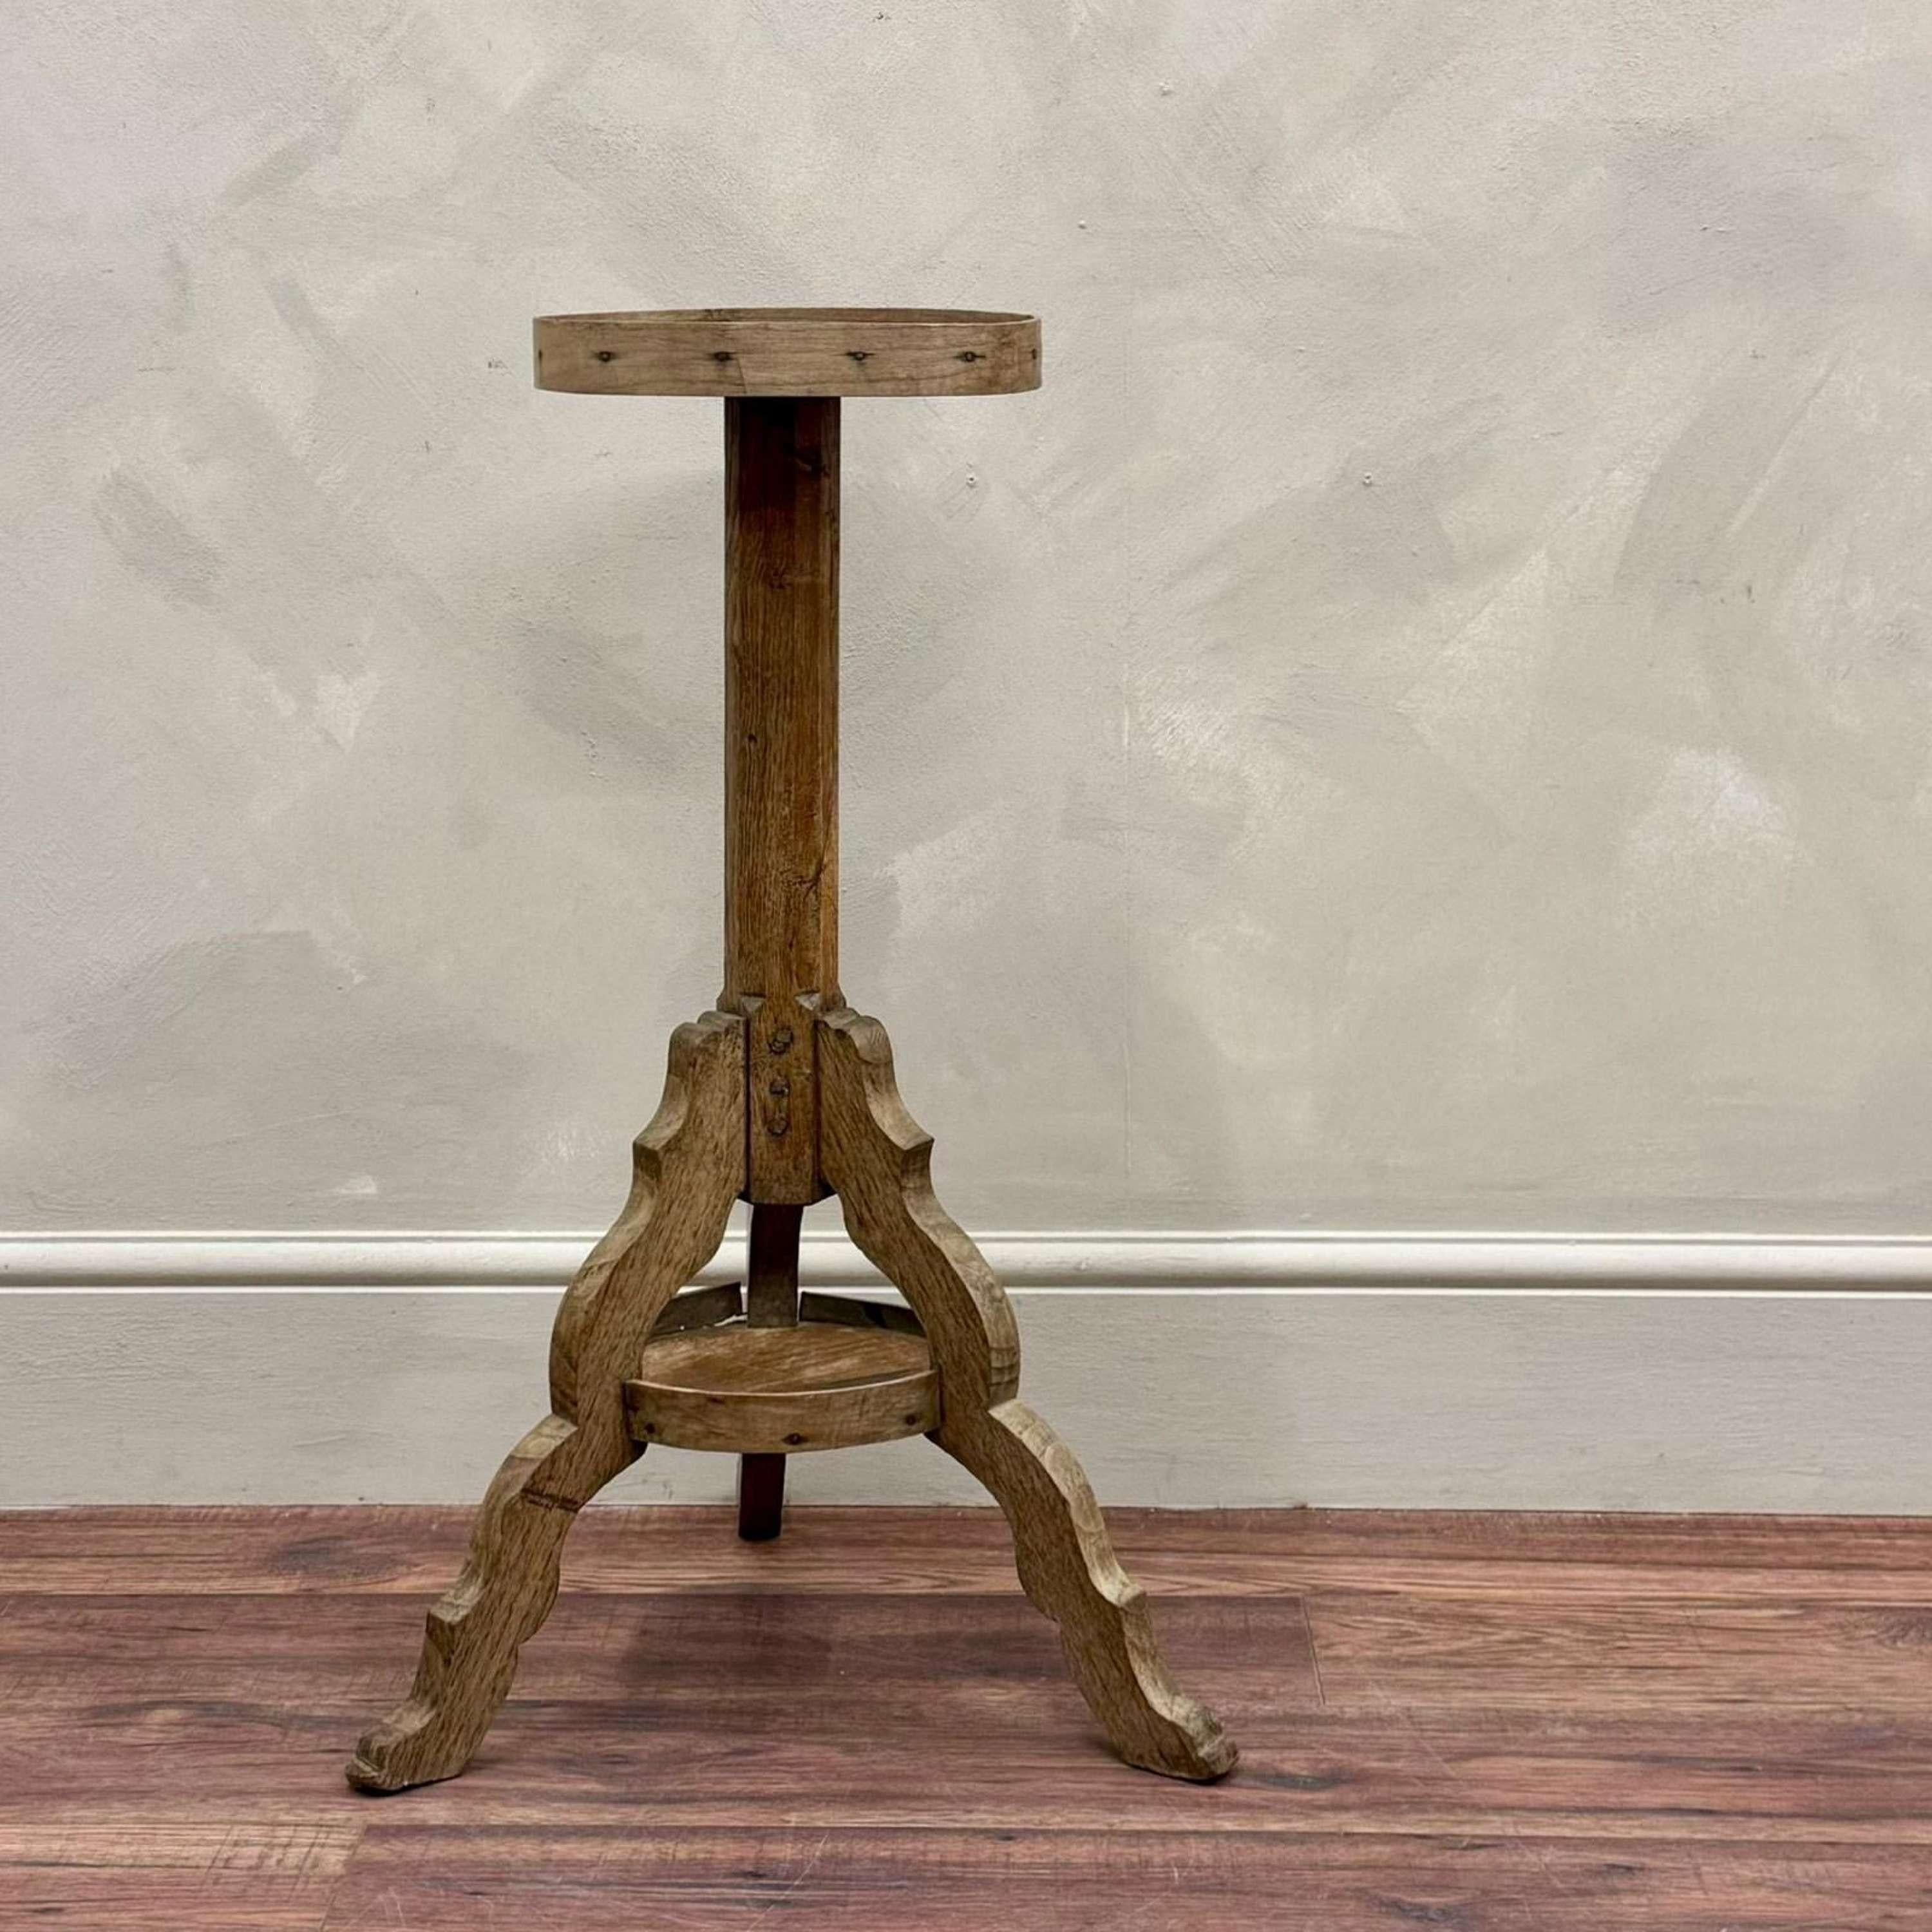 Primitive, 19th century, bentwood side table / jardiniere stand.
Tri form hand carved, peg jointed legs.
Sweden circa, 1880

Height - 73.4 cm
Top Diameter - 26 cm
Leg Diameter 44 cm

Please message if any further info or photos are required 

We are